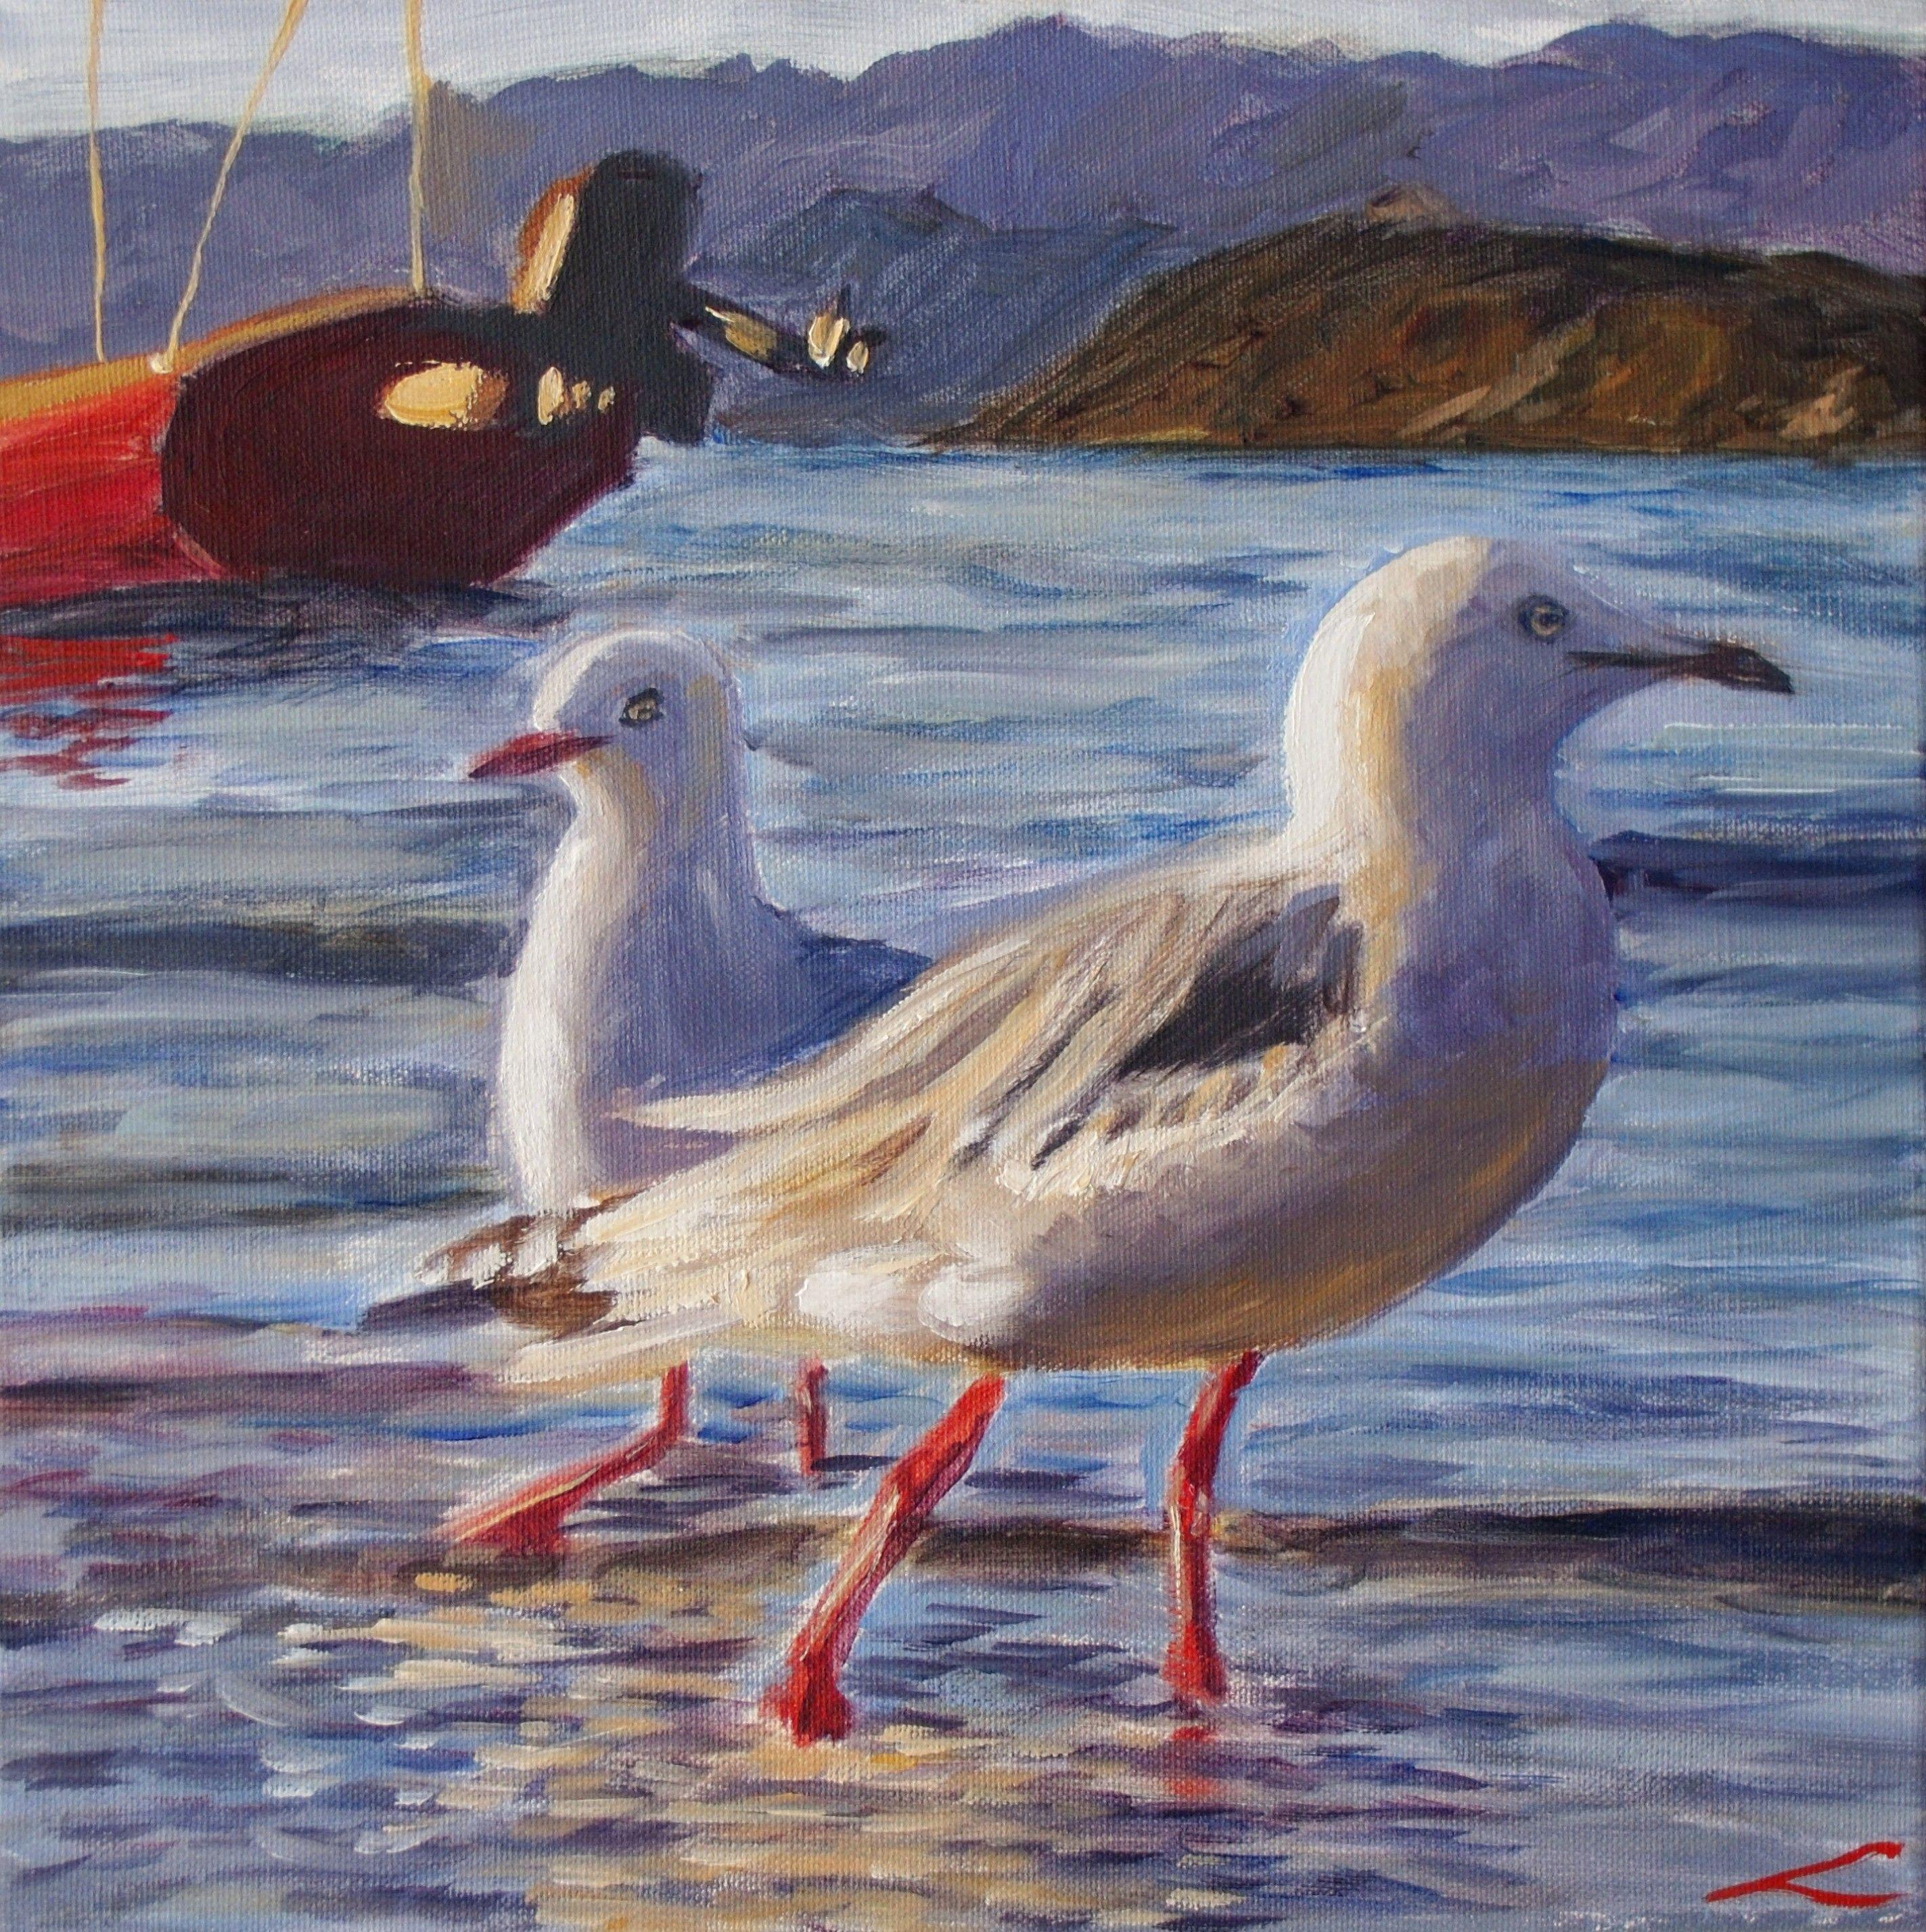 Two walking seagulls. Alla prima oil painting with few final tuches when dry. Beach Paintings always inspire thoughts of holidays, long walks, warm breezes and relaxation. beach and ocean themed paintings that will bring the outdoors inside and